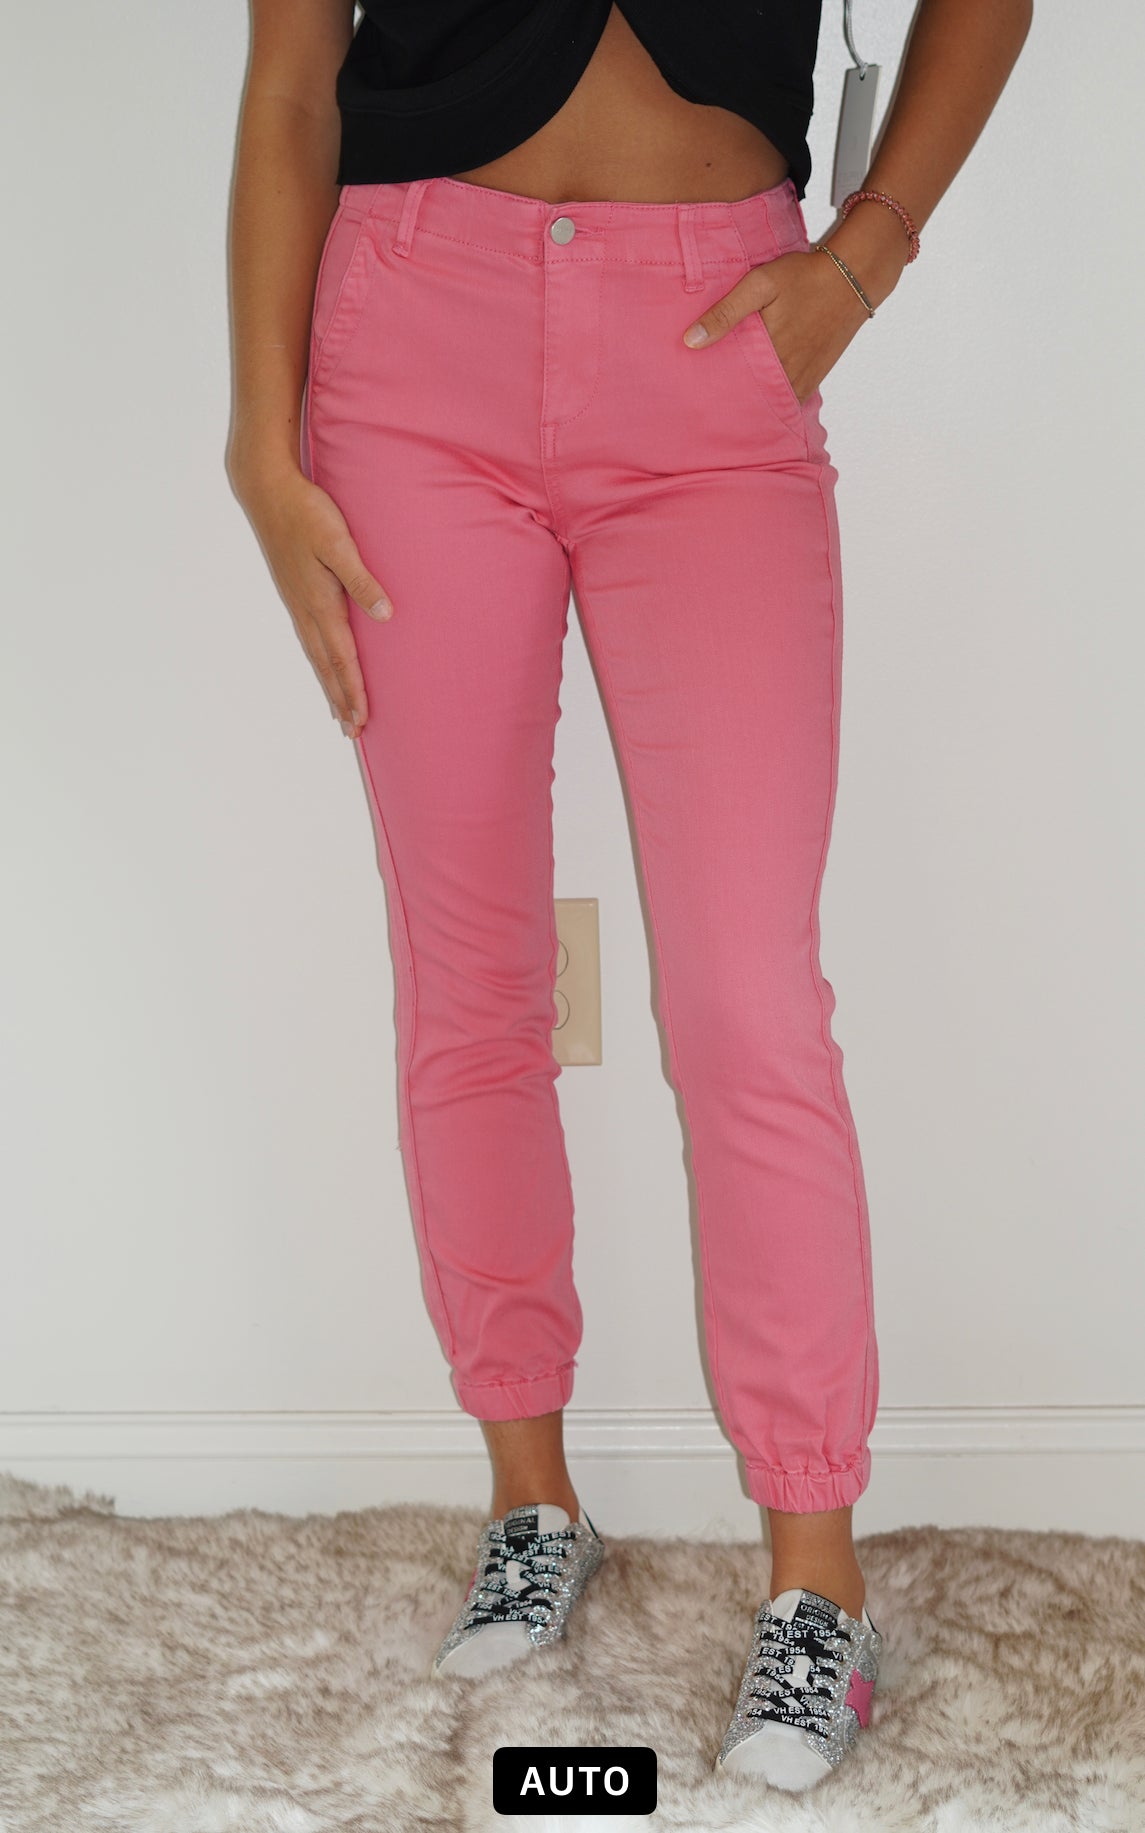 Belle High Rise Pink Jogger Jeans Cuffed Ankle  Pink Line Detail Down the side Button and Zipper Closure  Front and Back Pockets 92% Cotton 6% Polyester  2% Spandex Turn inside out, Machine wash cold, tumble dry low, gentle cycle with colors, Do not bleach, hang to dry, Indigo will bleed, iron if needed  Model Wearing Size 1